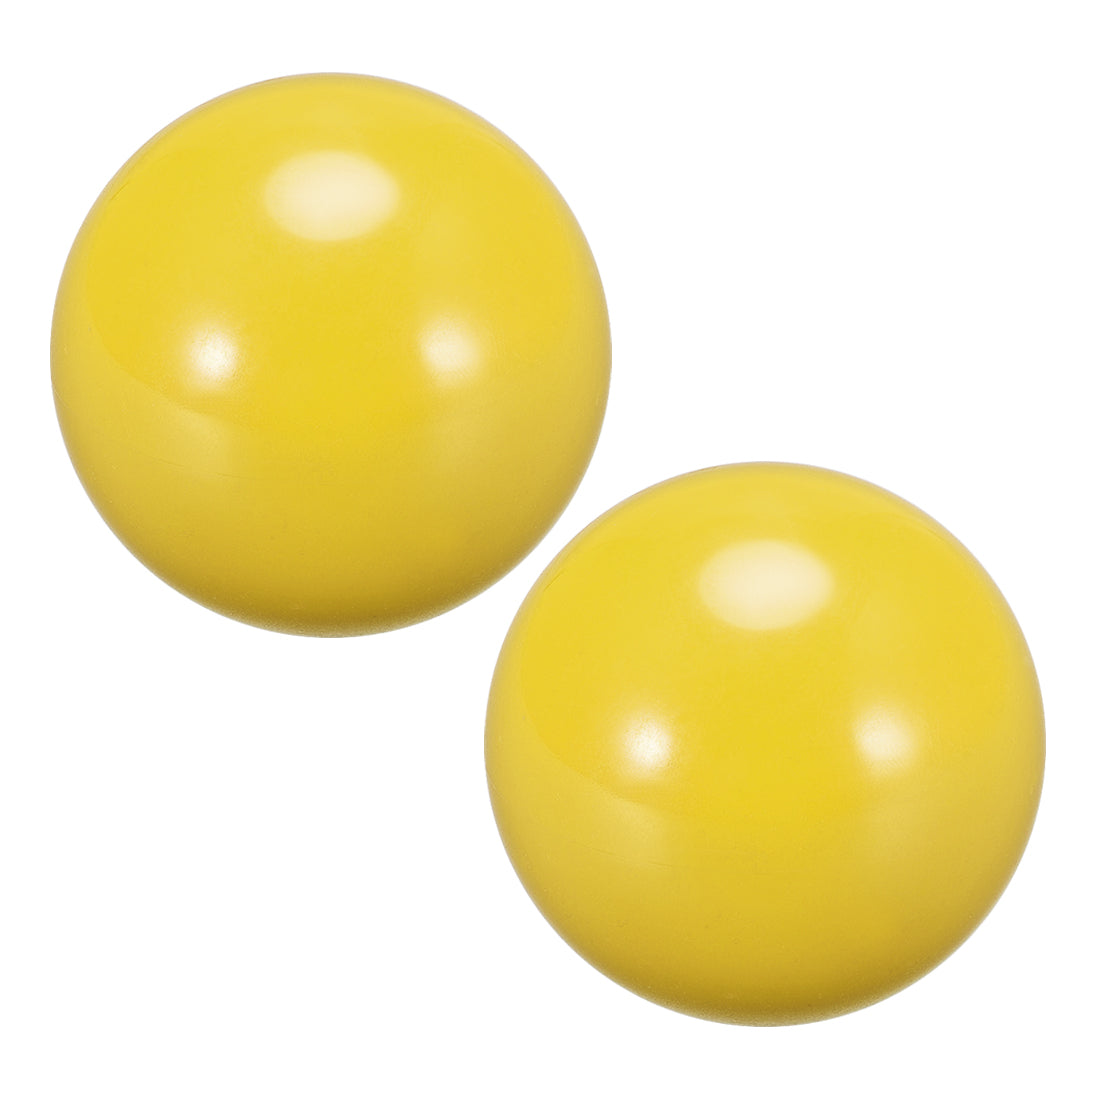 uxcell Uxcell Joystick Ball Top Handle Rocker Round Head Arcade Fighting Game DIY Parts Replacement Yellow 2Pcs